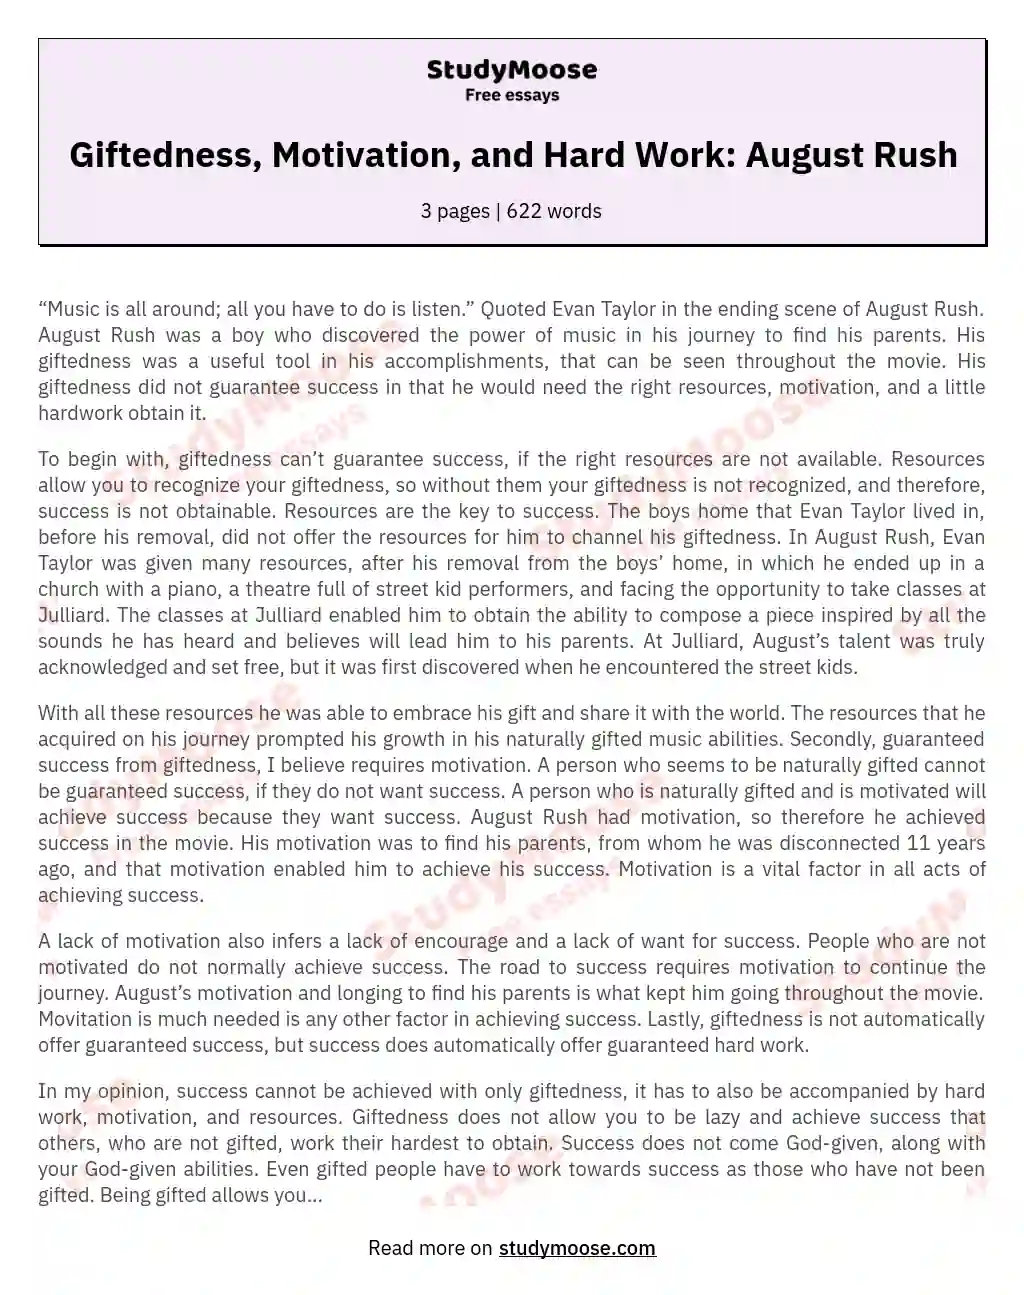 Giftedness, Motivation, and Hard Work: August Rush essay